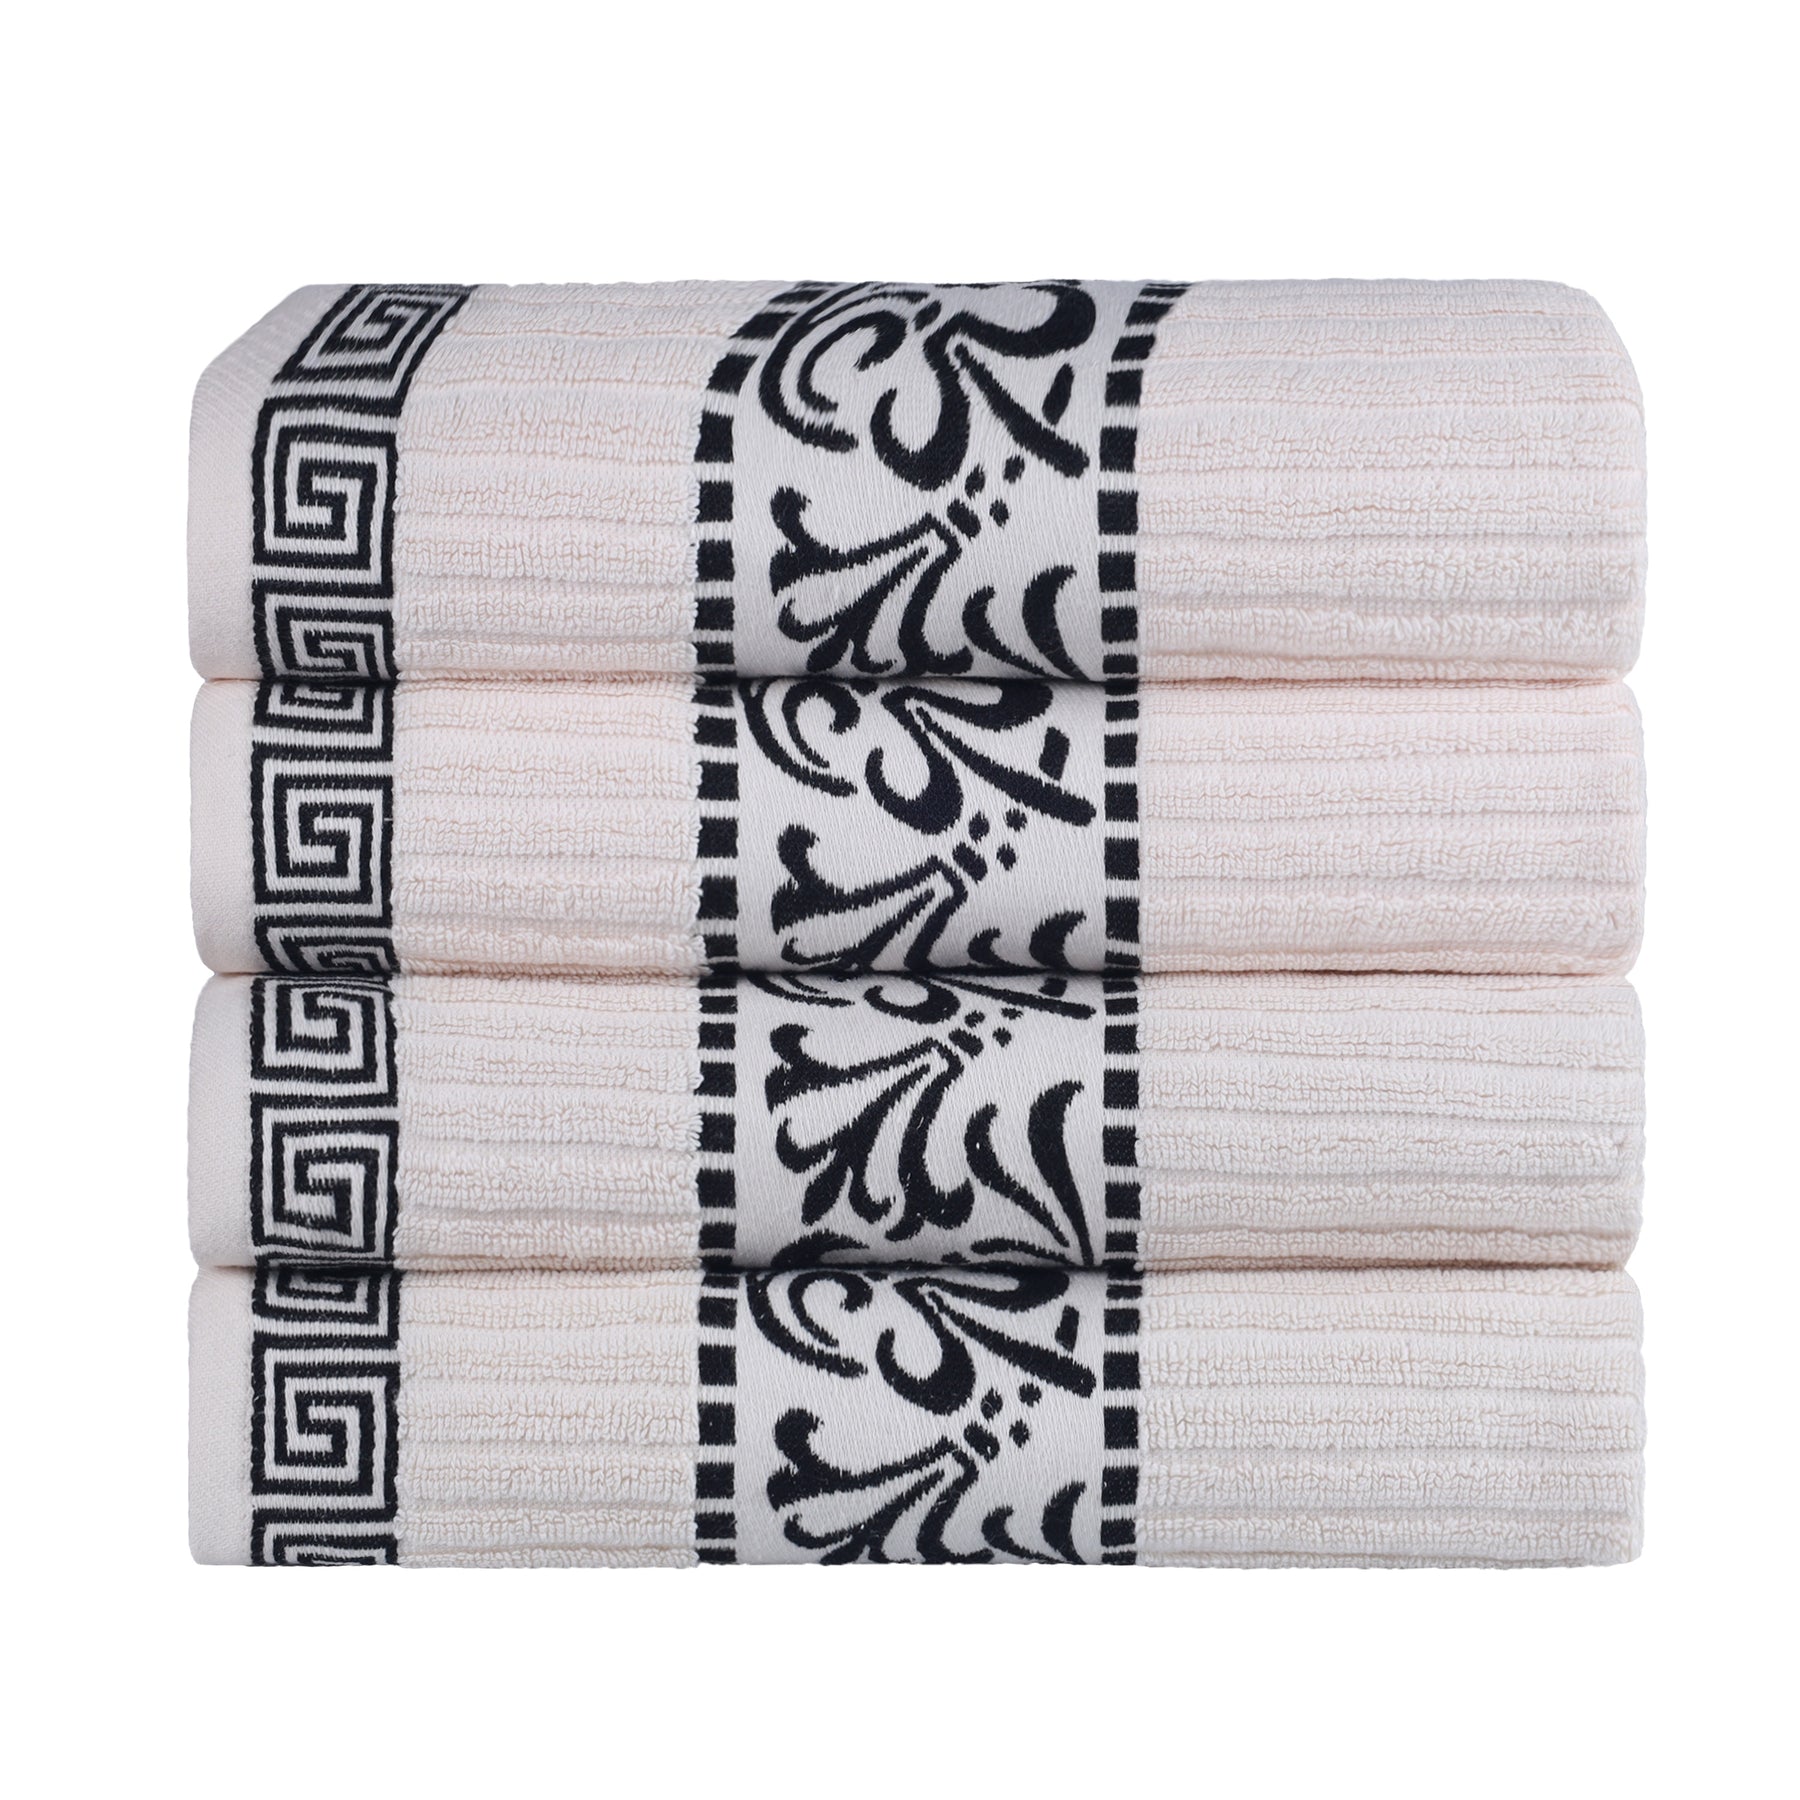 Superior Athens Cotton 4-Piece Bath Towel Set with Greek Scroll and Floral Pattern - Ivory-Black